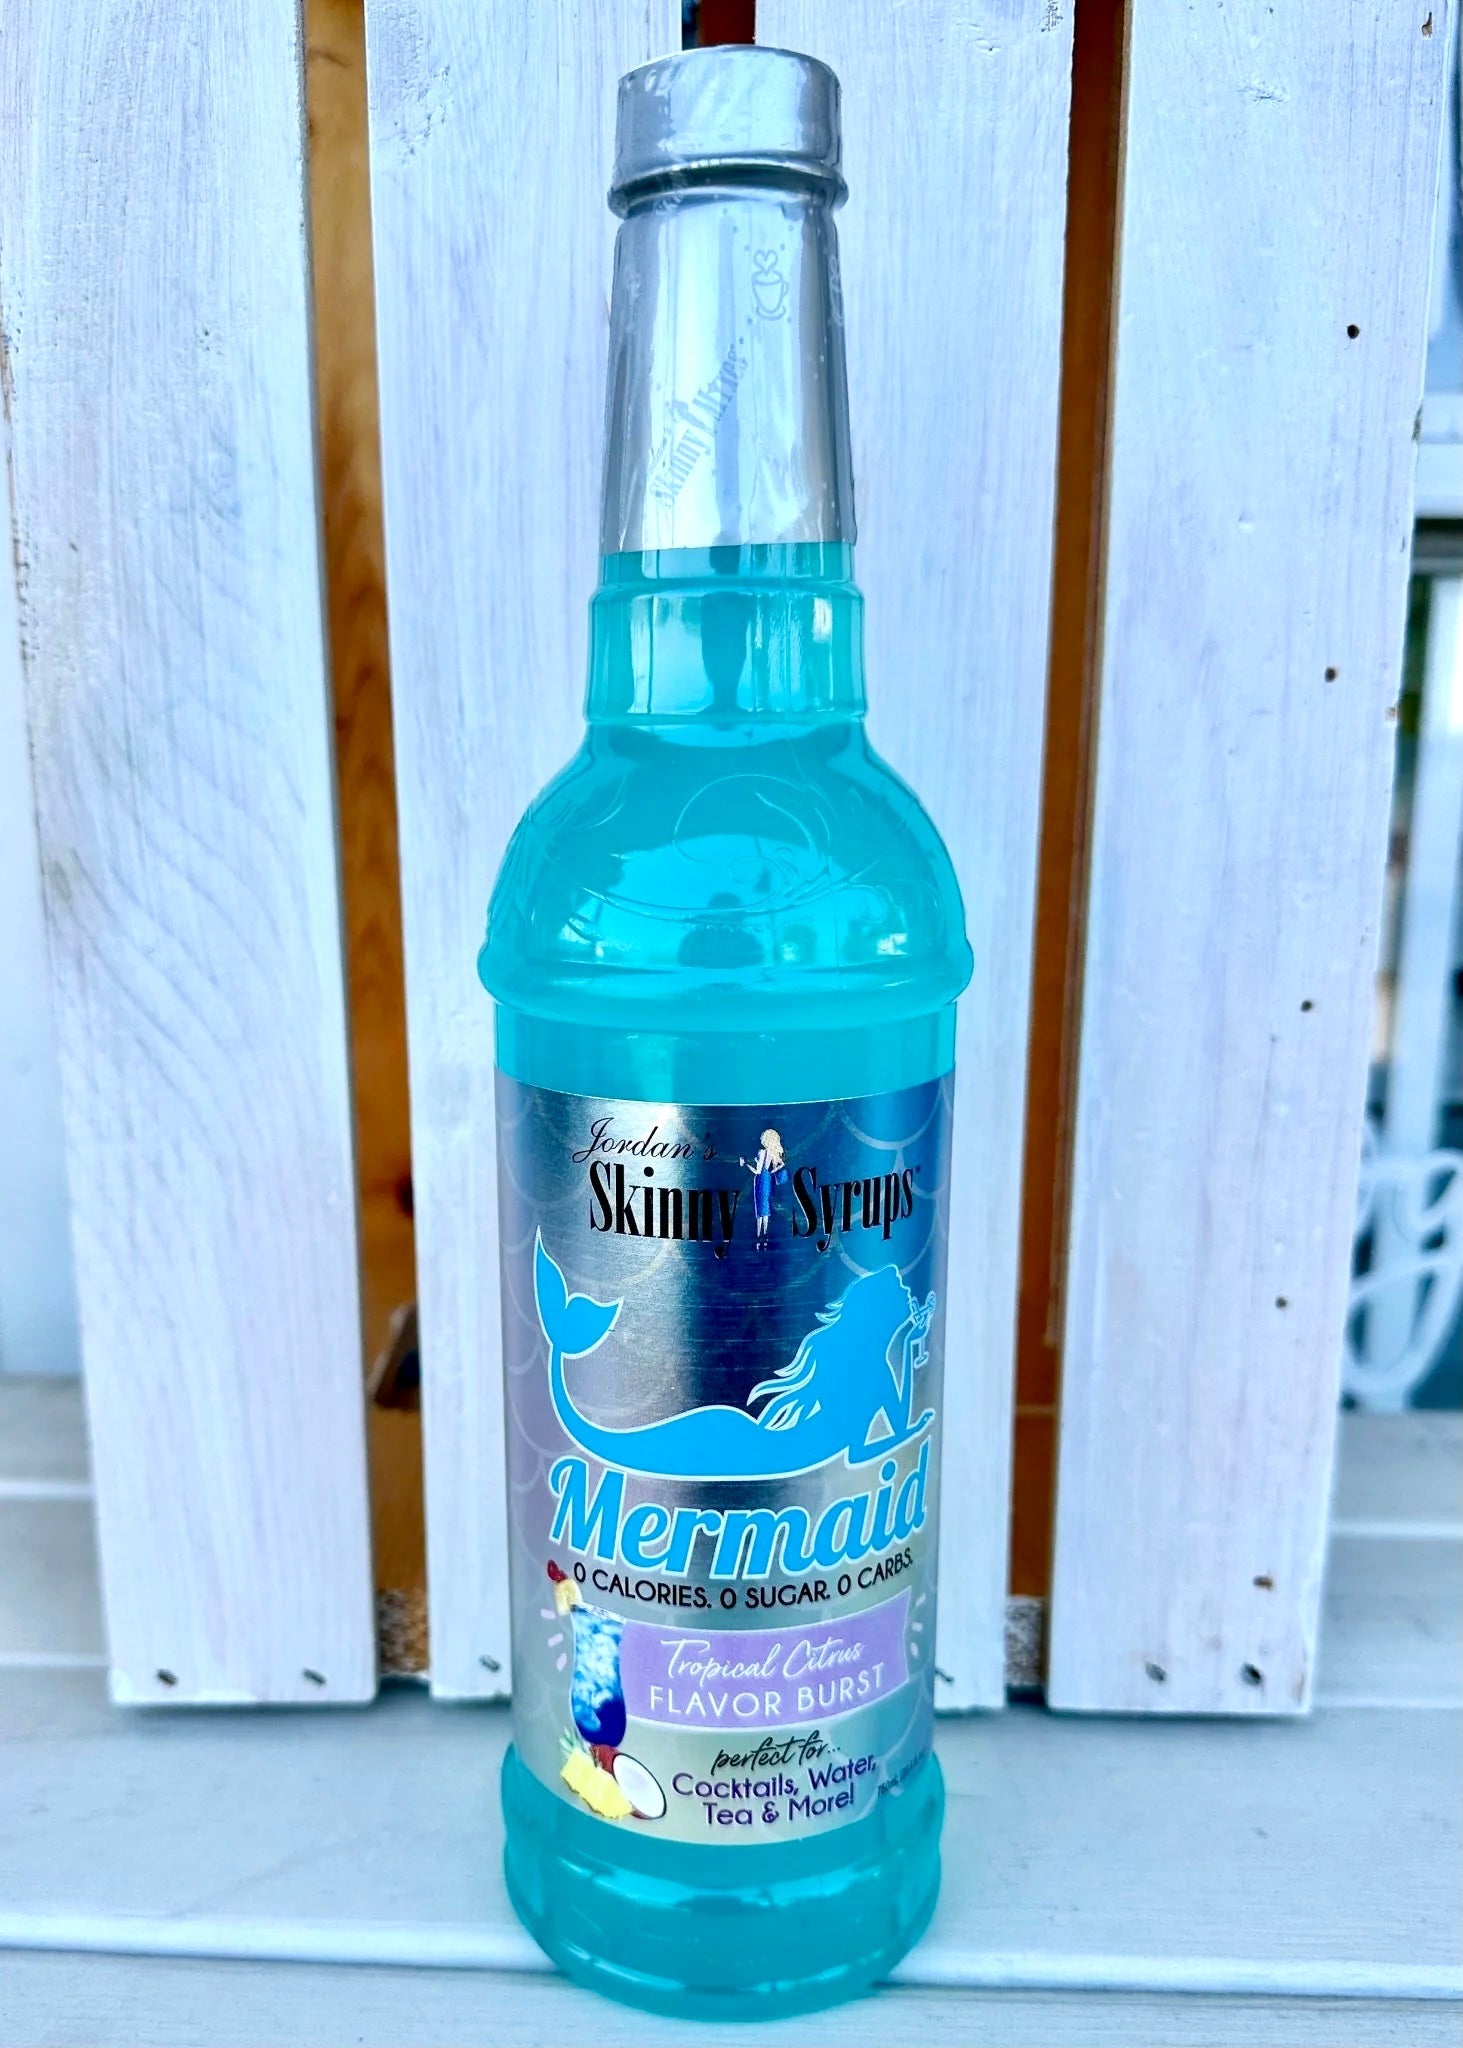 Jordan's Sugar Free Mermaid - Skinny Syrups - 25.4/750ml - Skinny Syrups -Jimberly's Boutique-Olive Branch-Mississippi